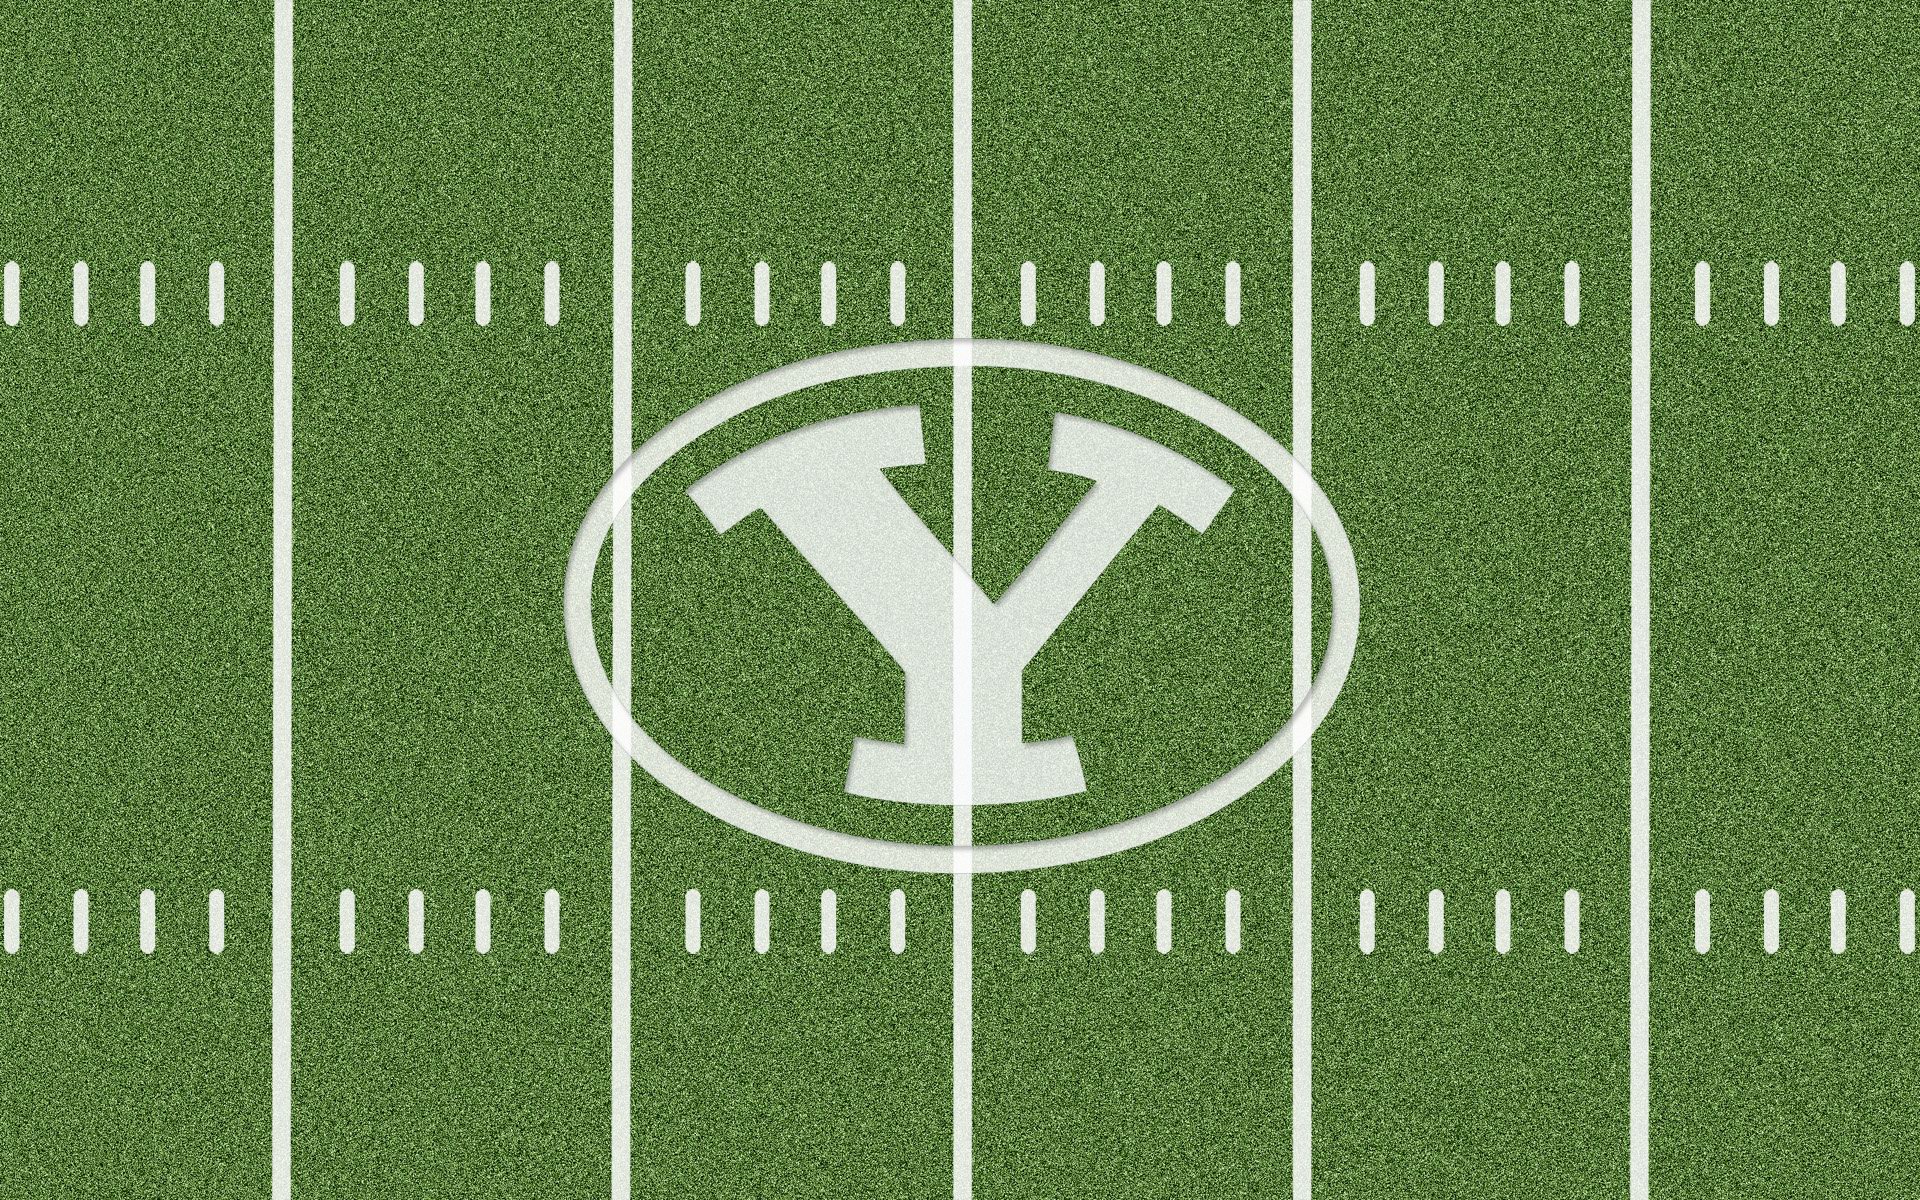 Football Field Byu Cougars Logo On With Resolutions